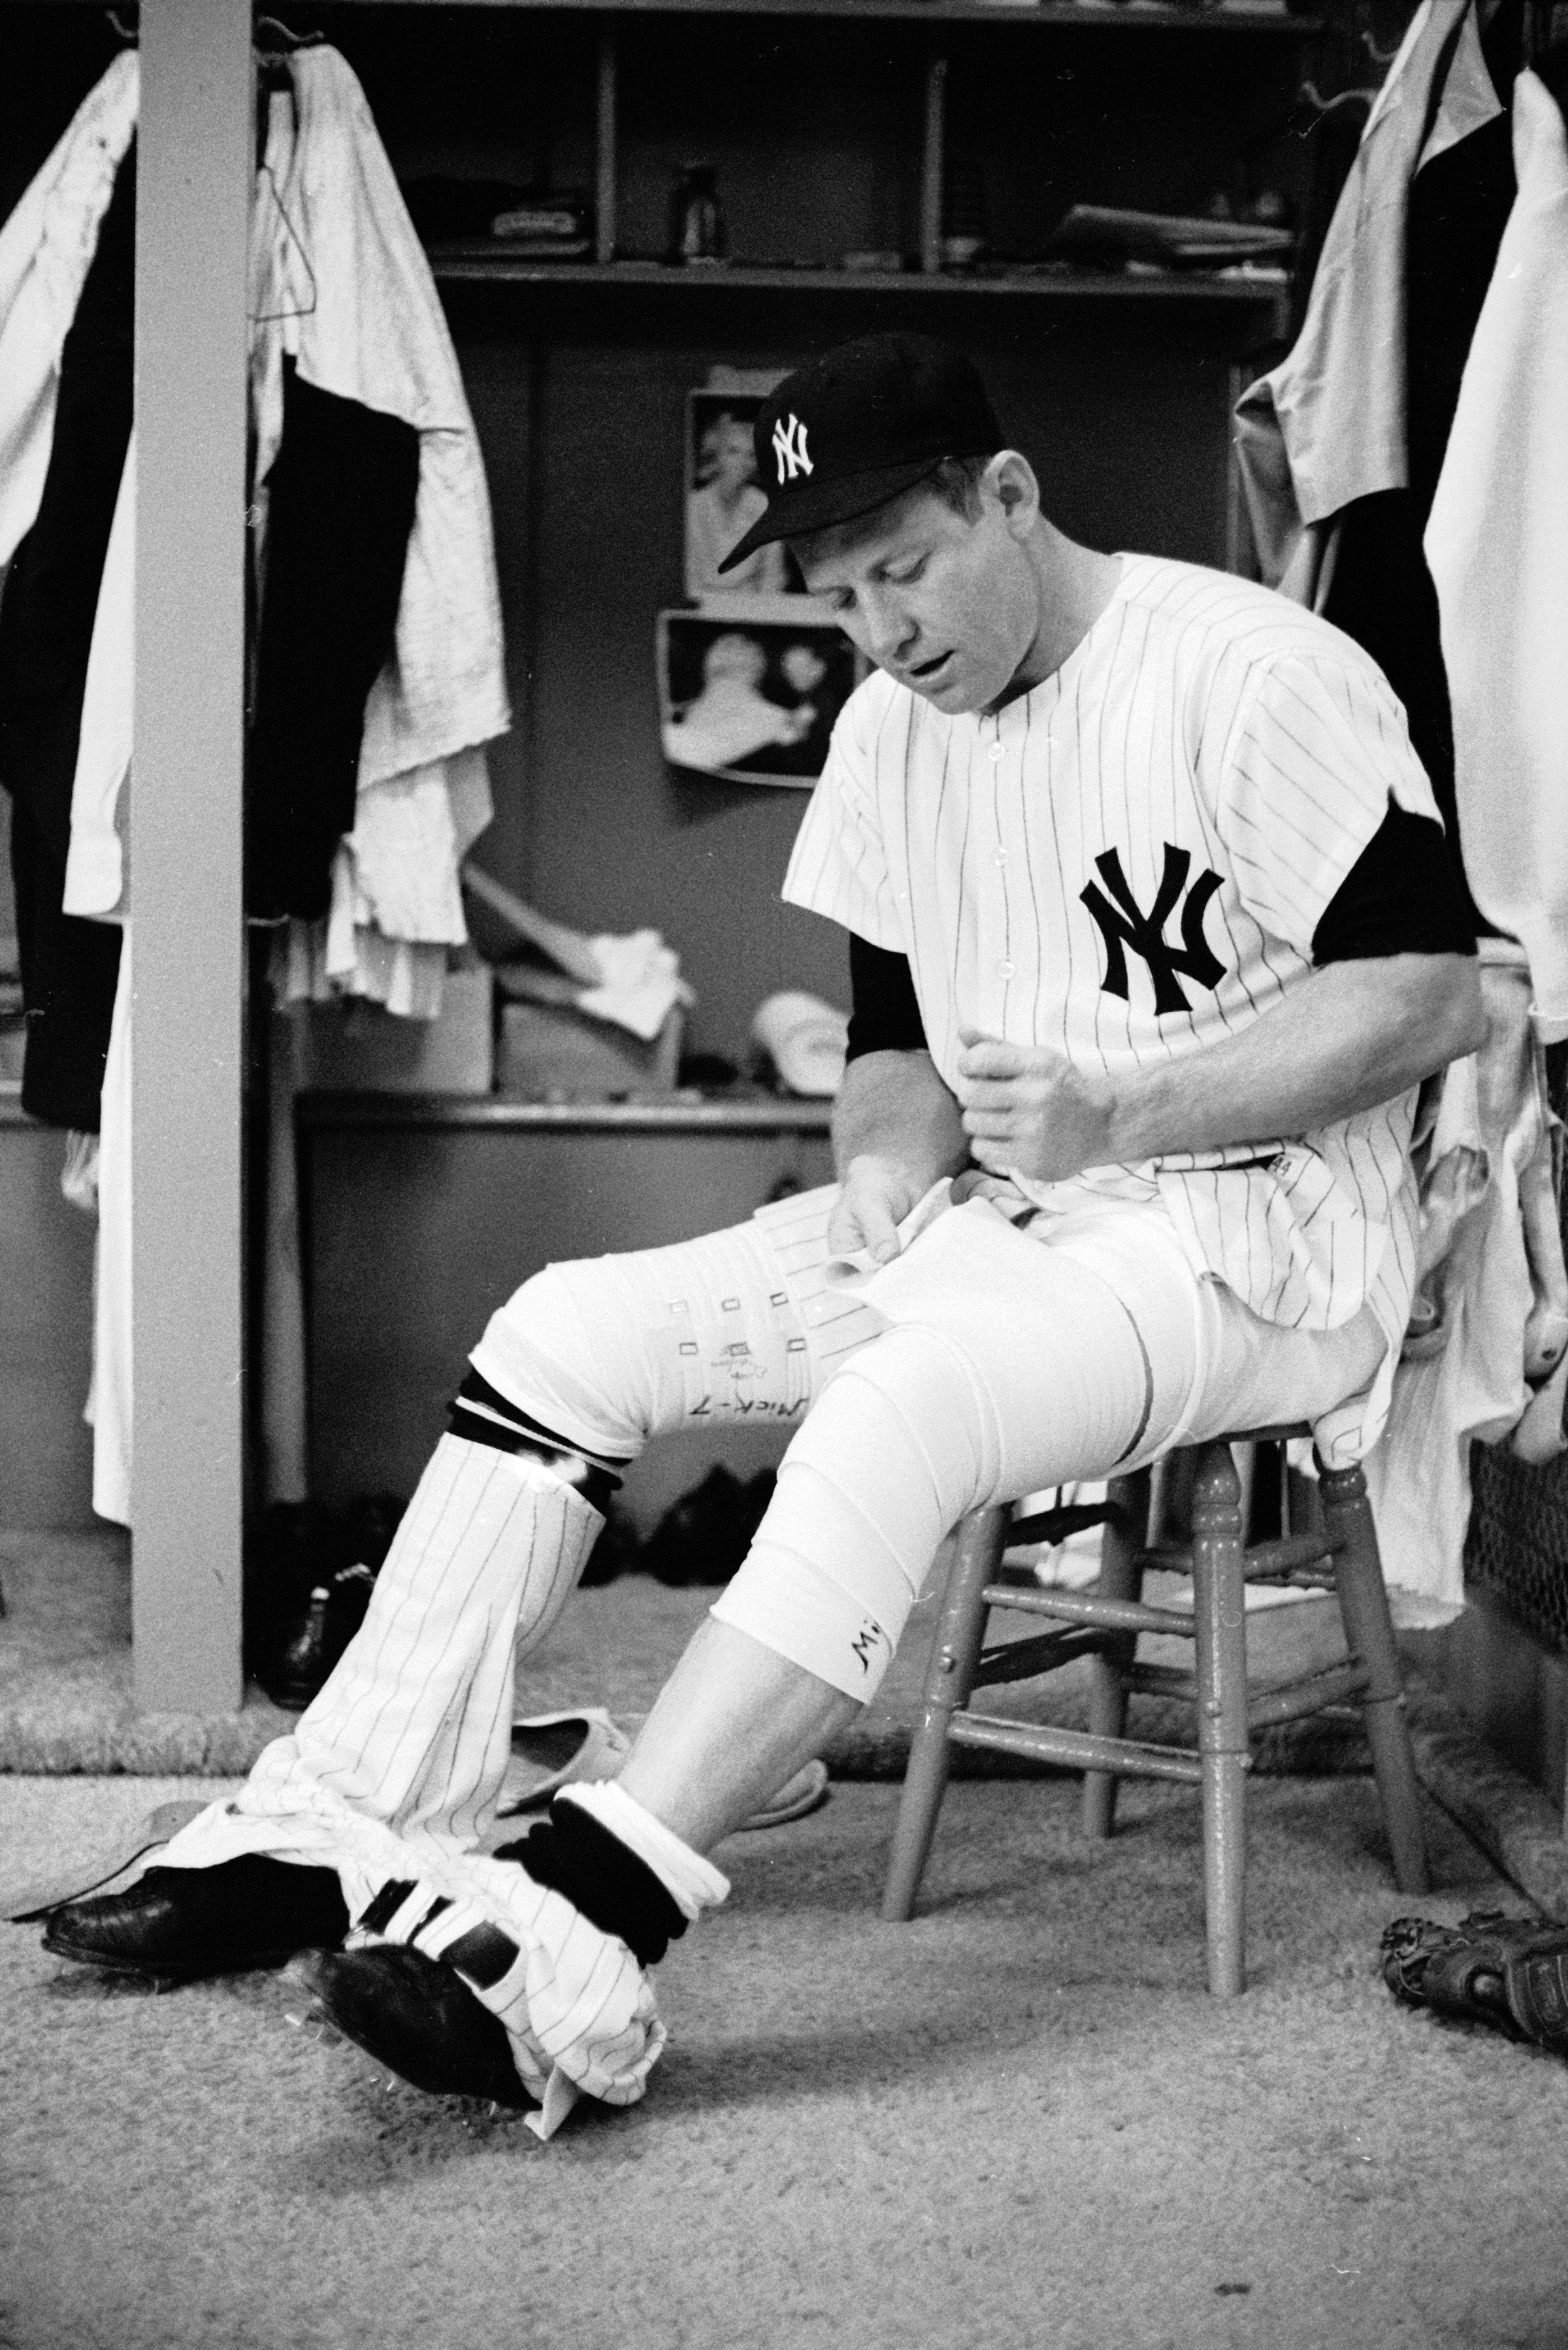 Mickey Mantle bandages his leg in the locker room before a game, June 1965.